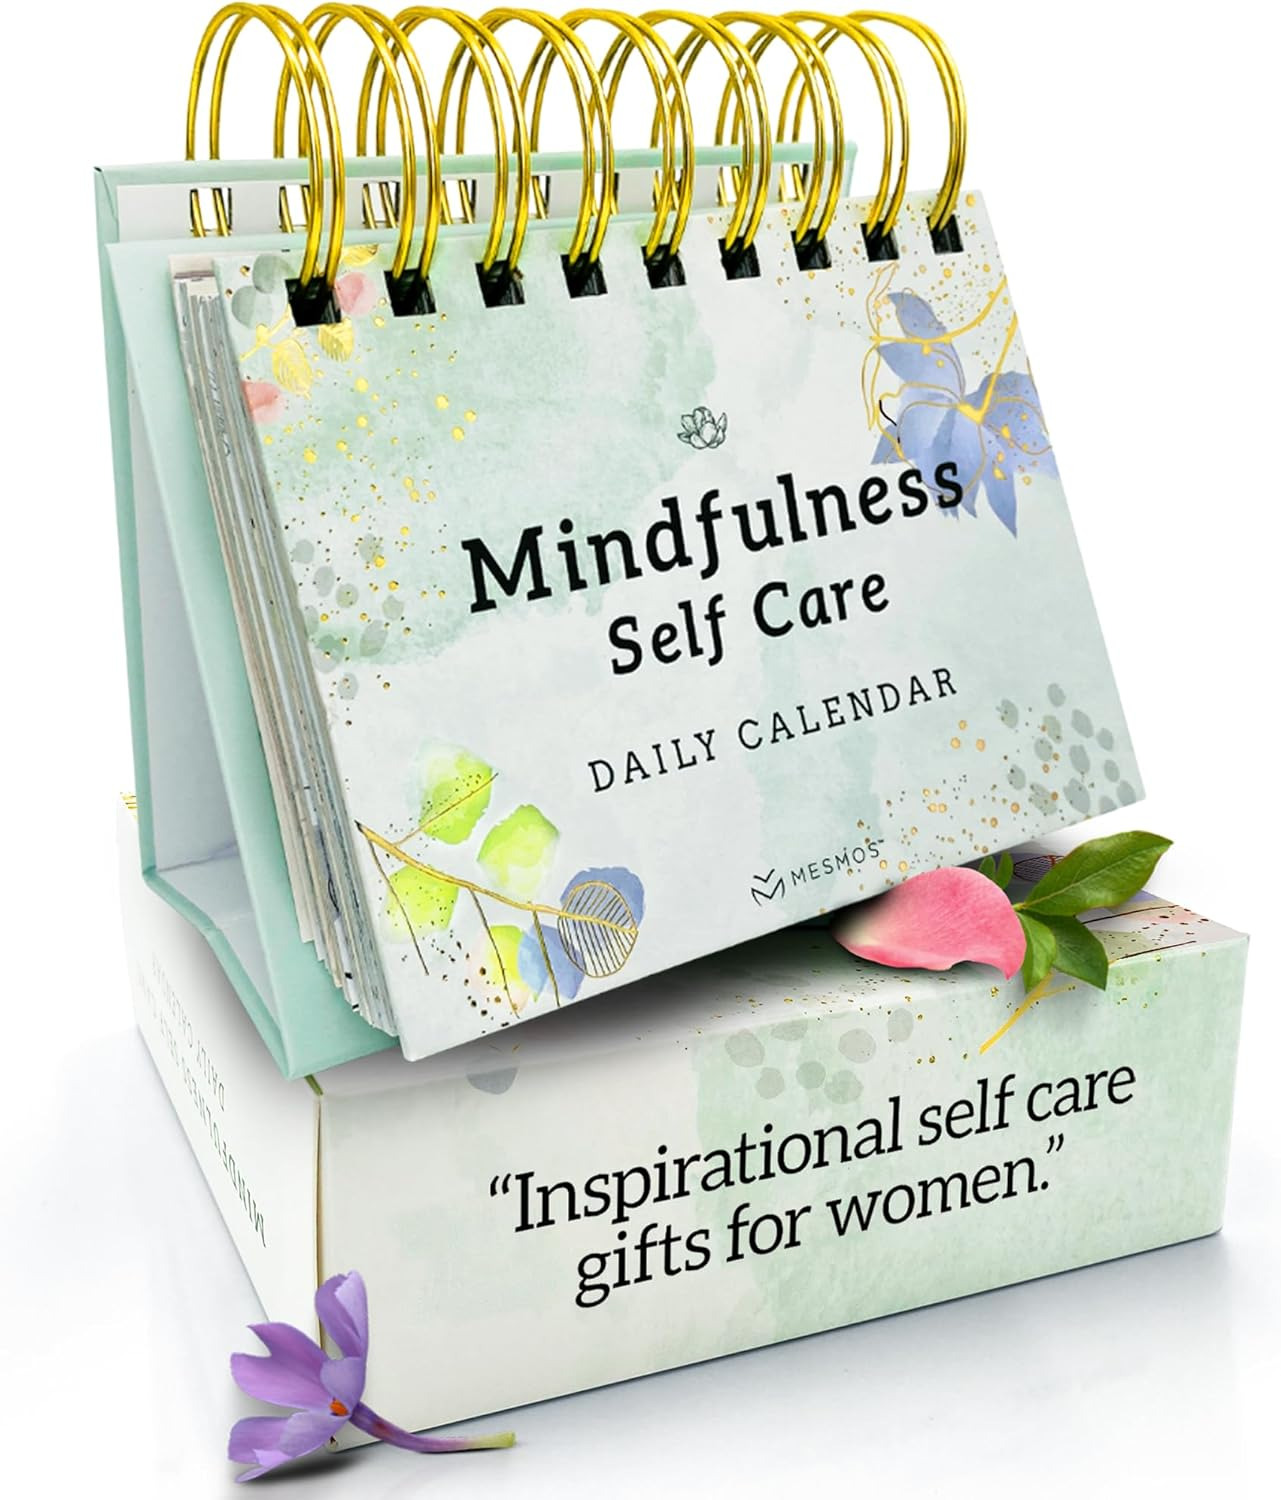 366 Daily Mindfulness Affirmation Quotes, Perpetual Desk Calendar, Inspirational